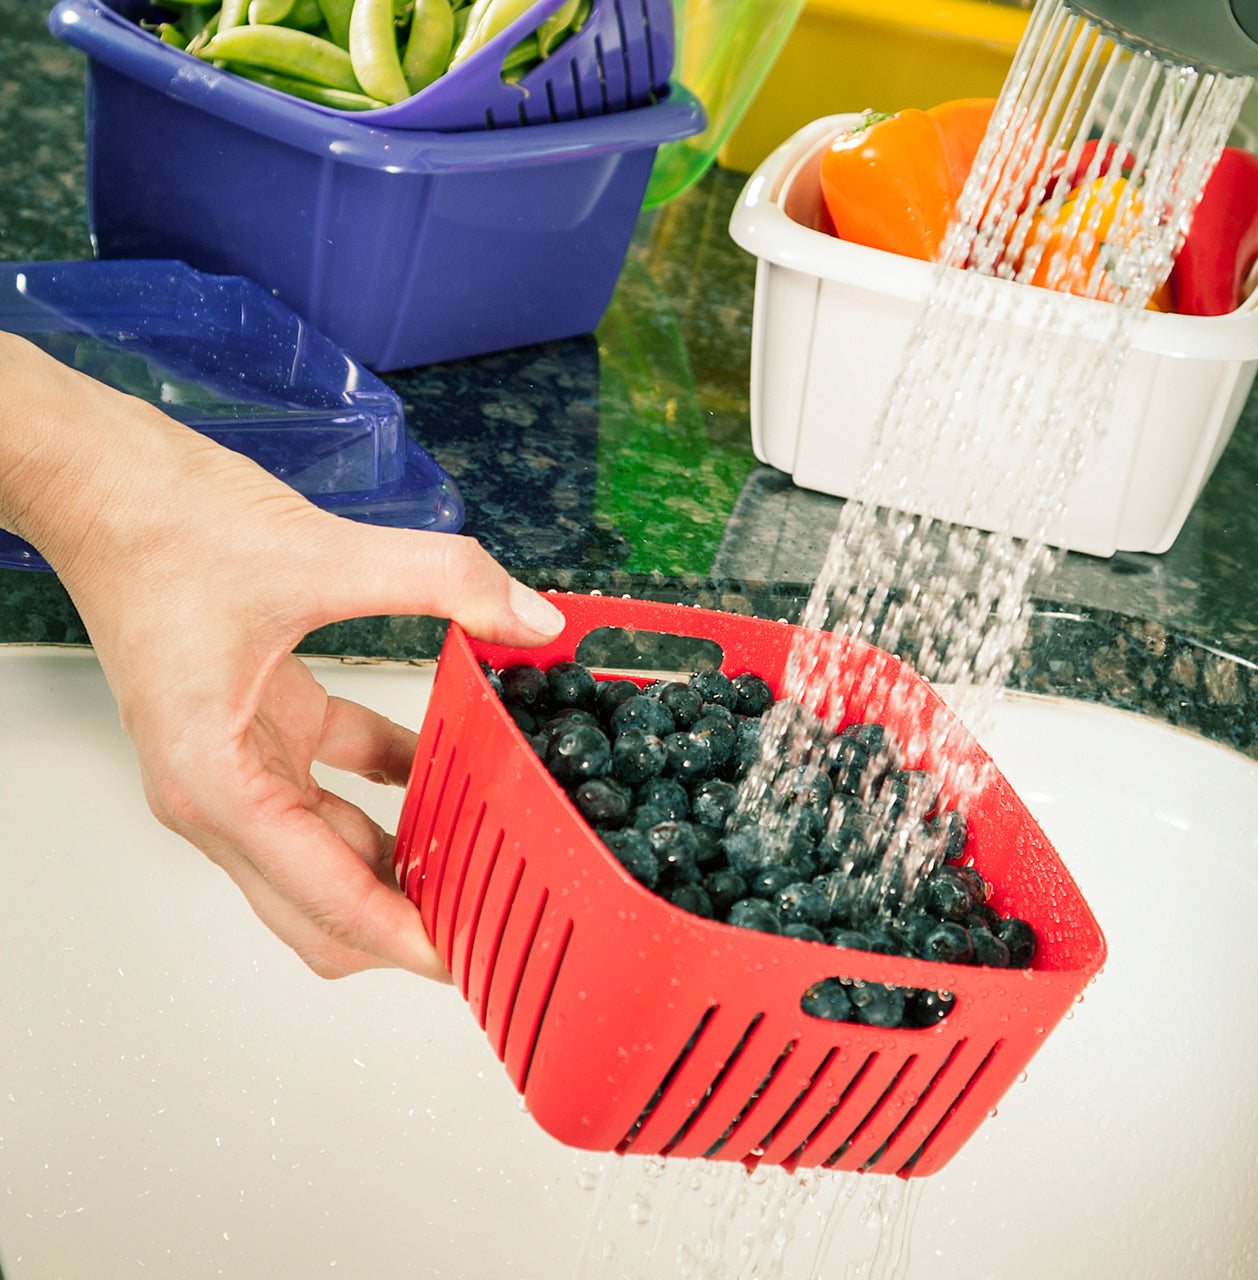 illustration of a berry box filled with blueberries being rinsed in a sink